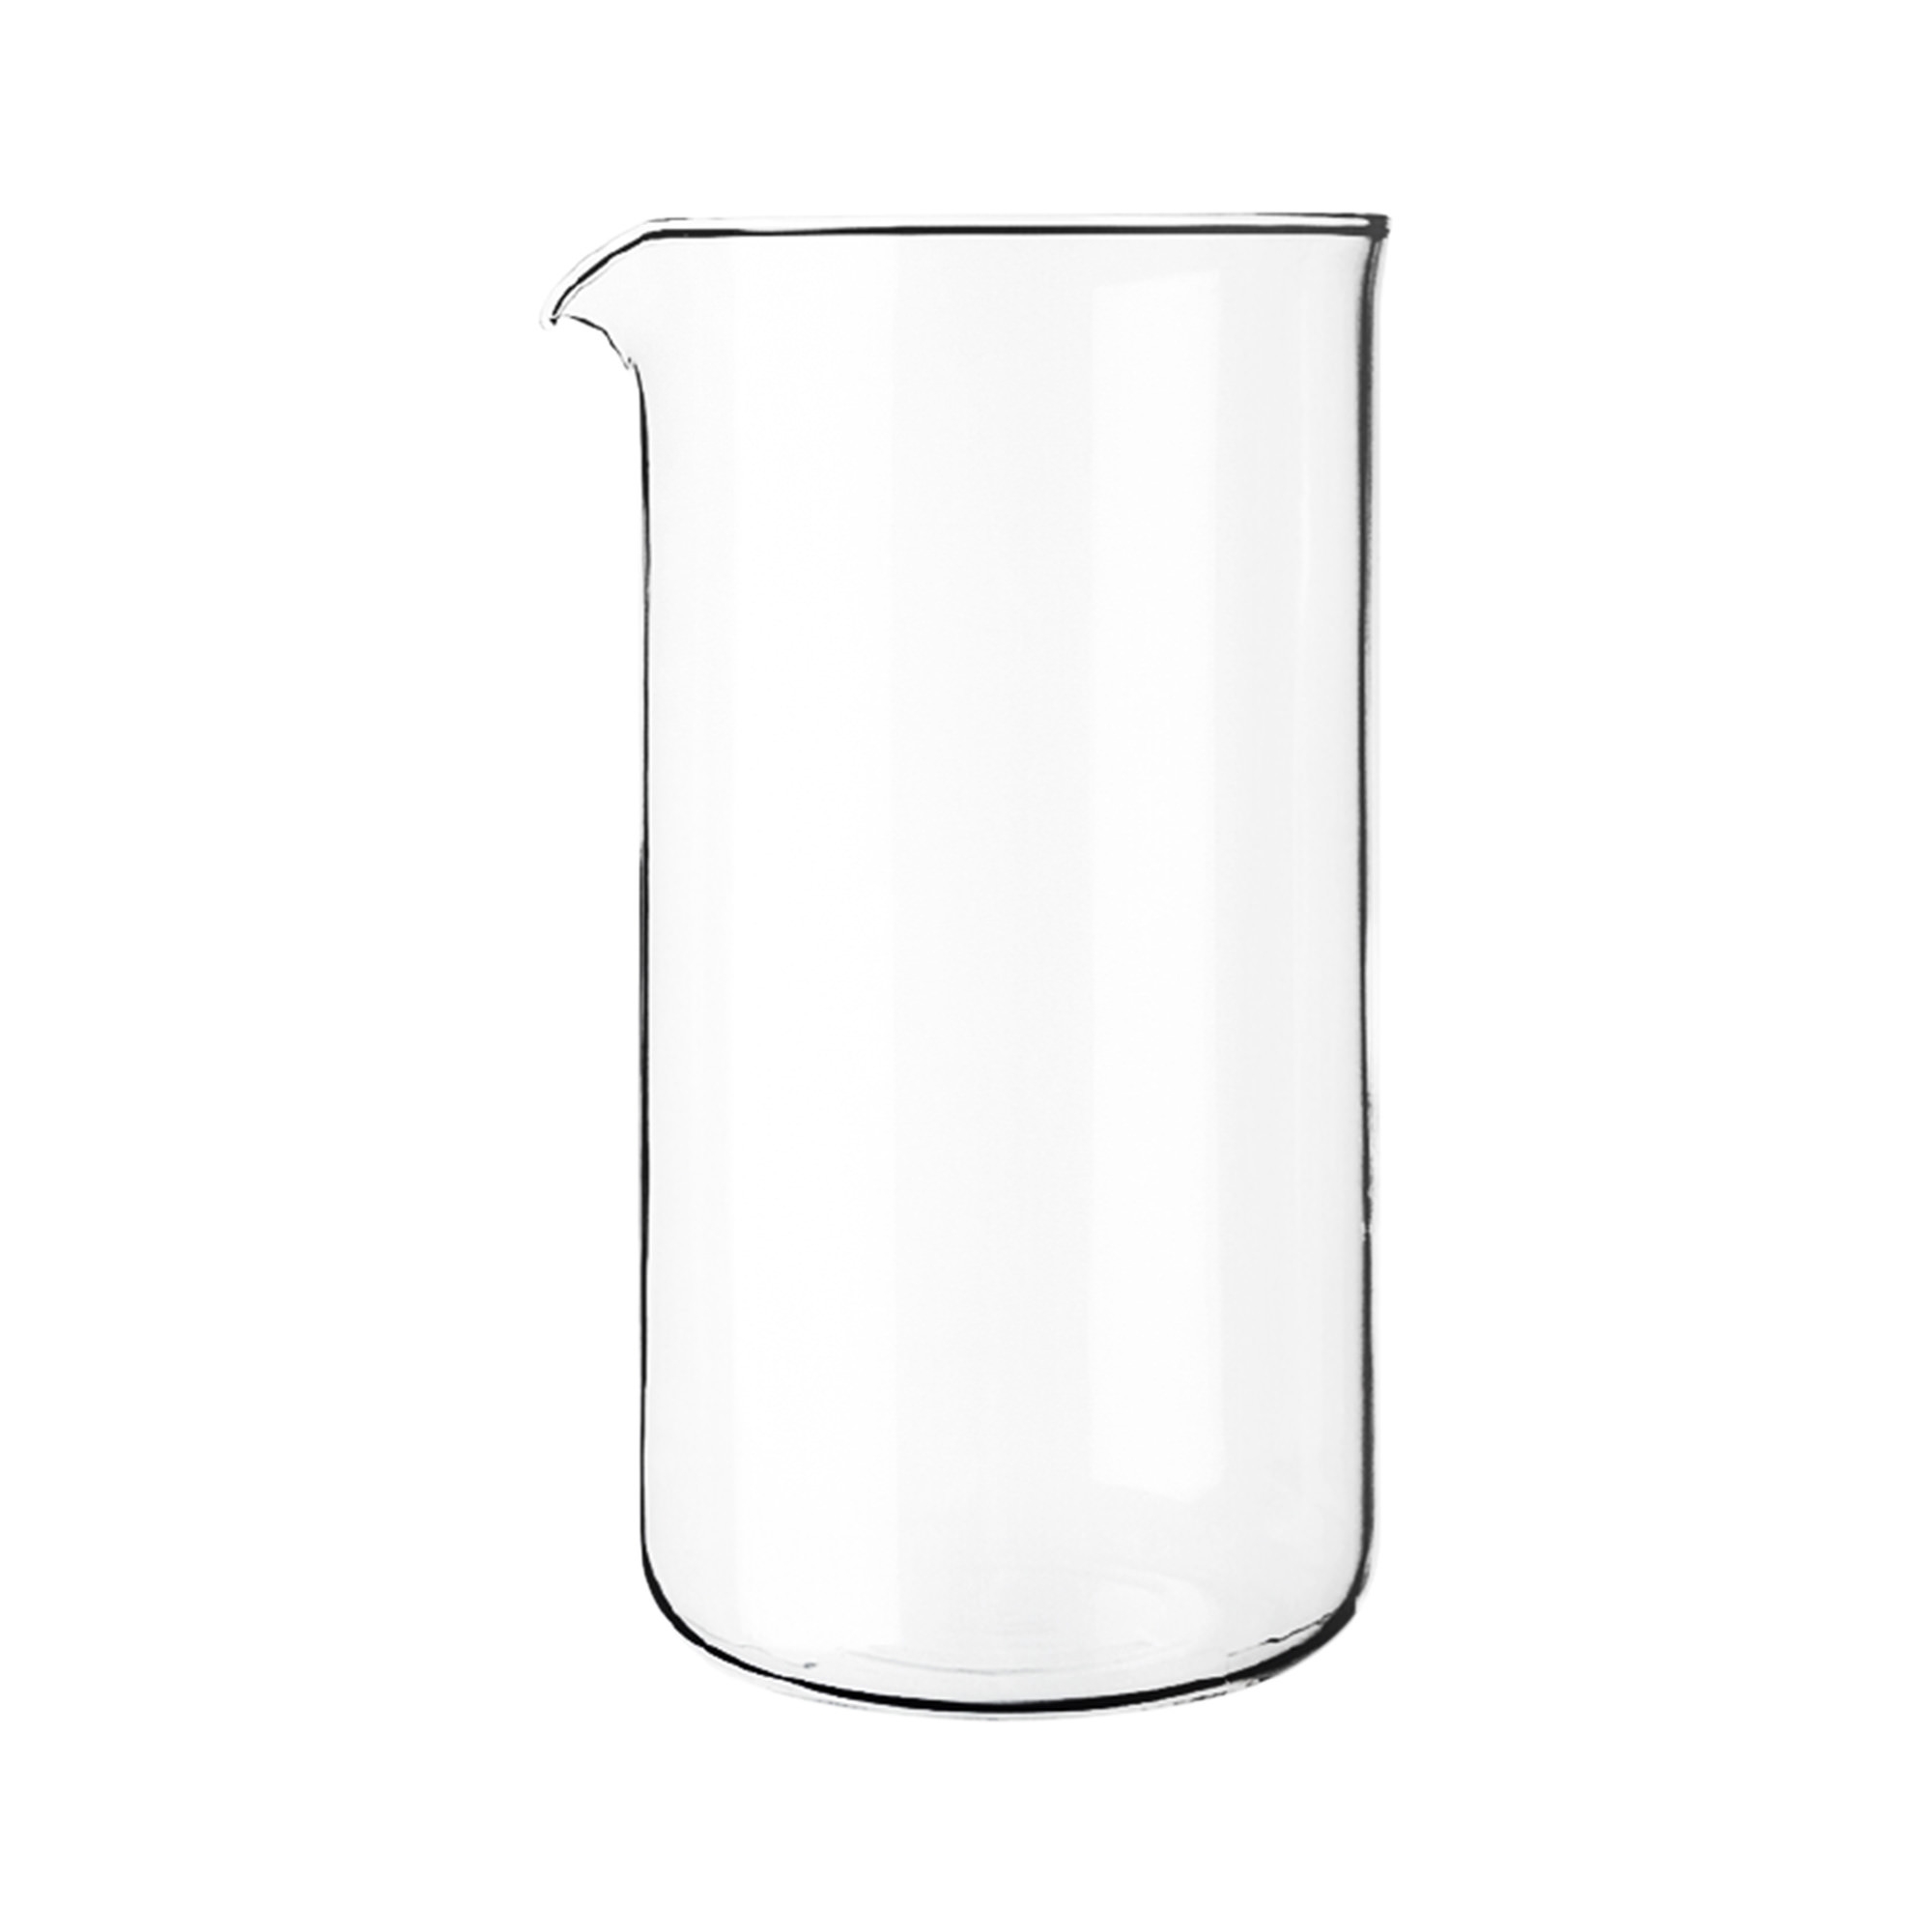 Bodum Spare Glass for Chambord Coffee Maker 3 Cup Image 1